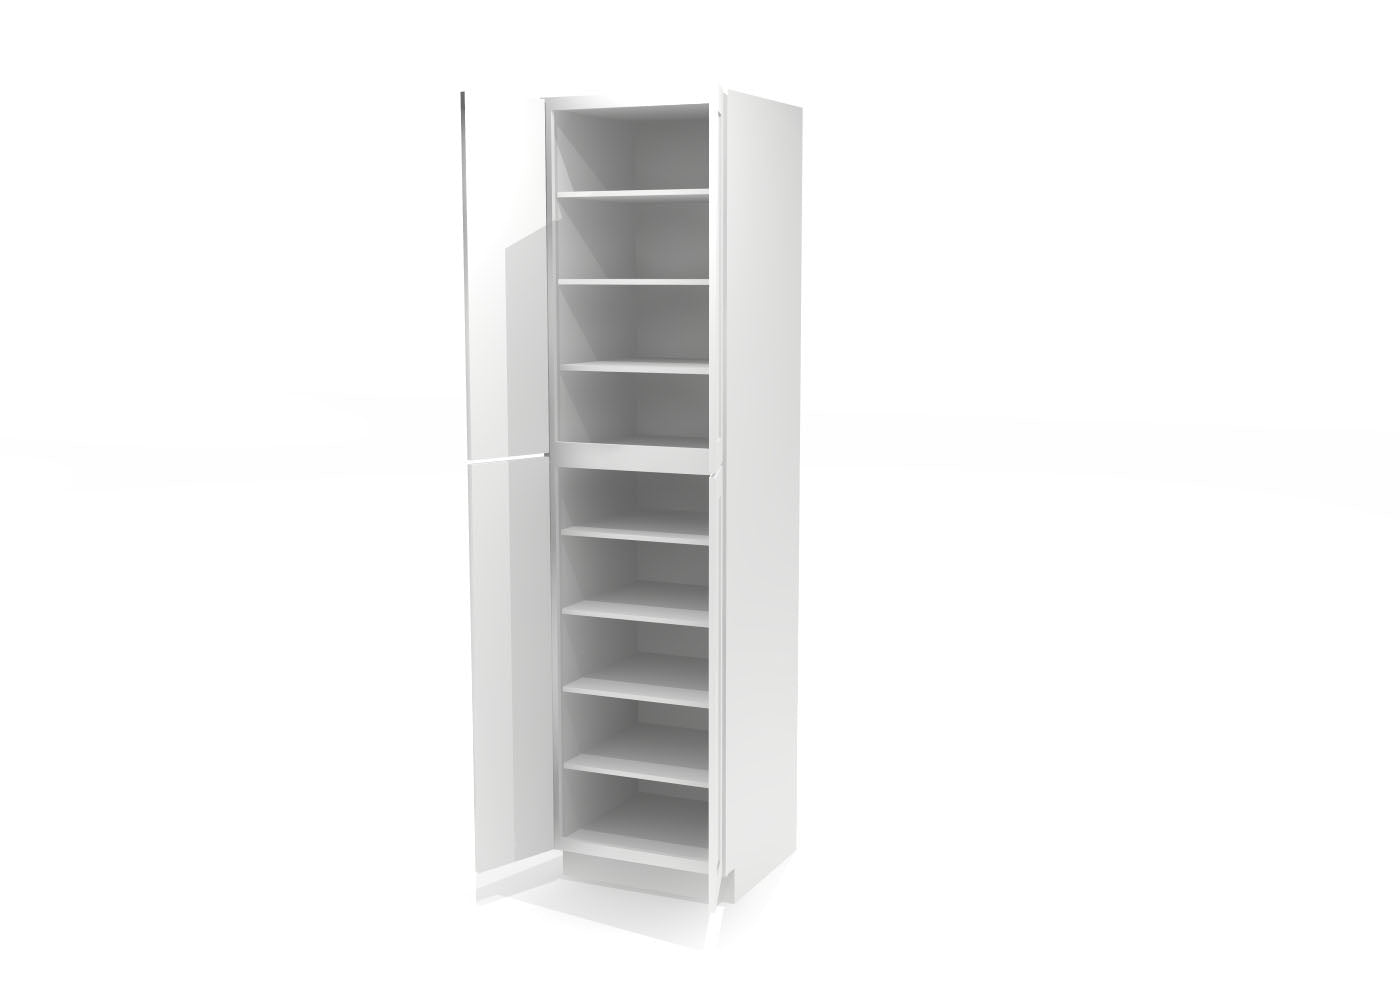 Utility Pantry Double Door 96" by 24" Wide White Shaker Cabinet